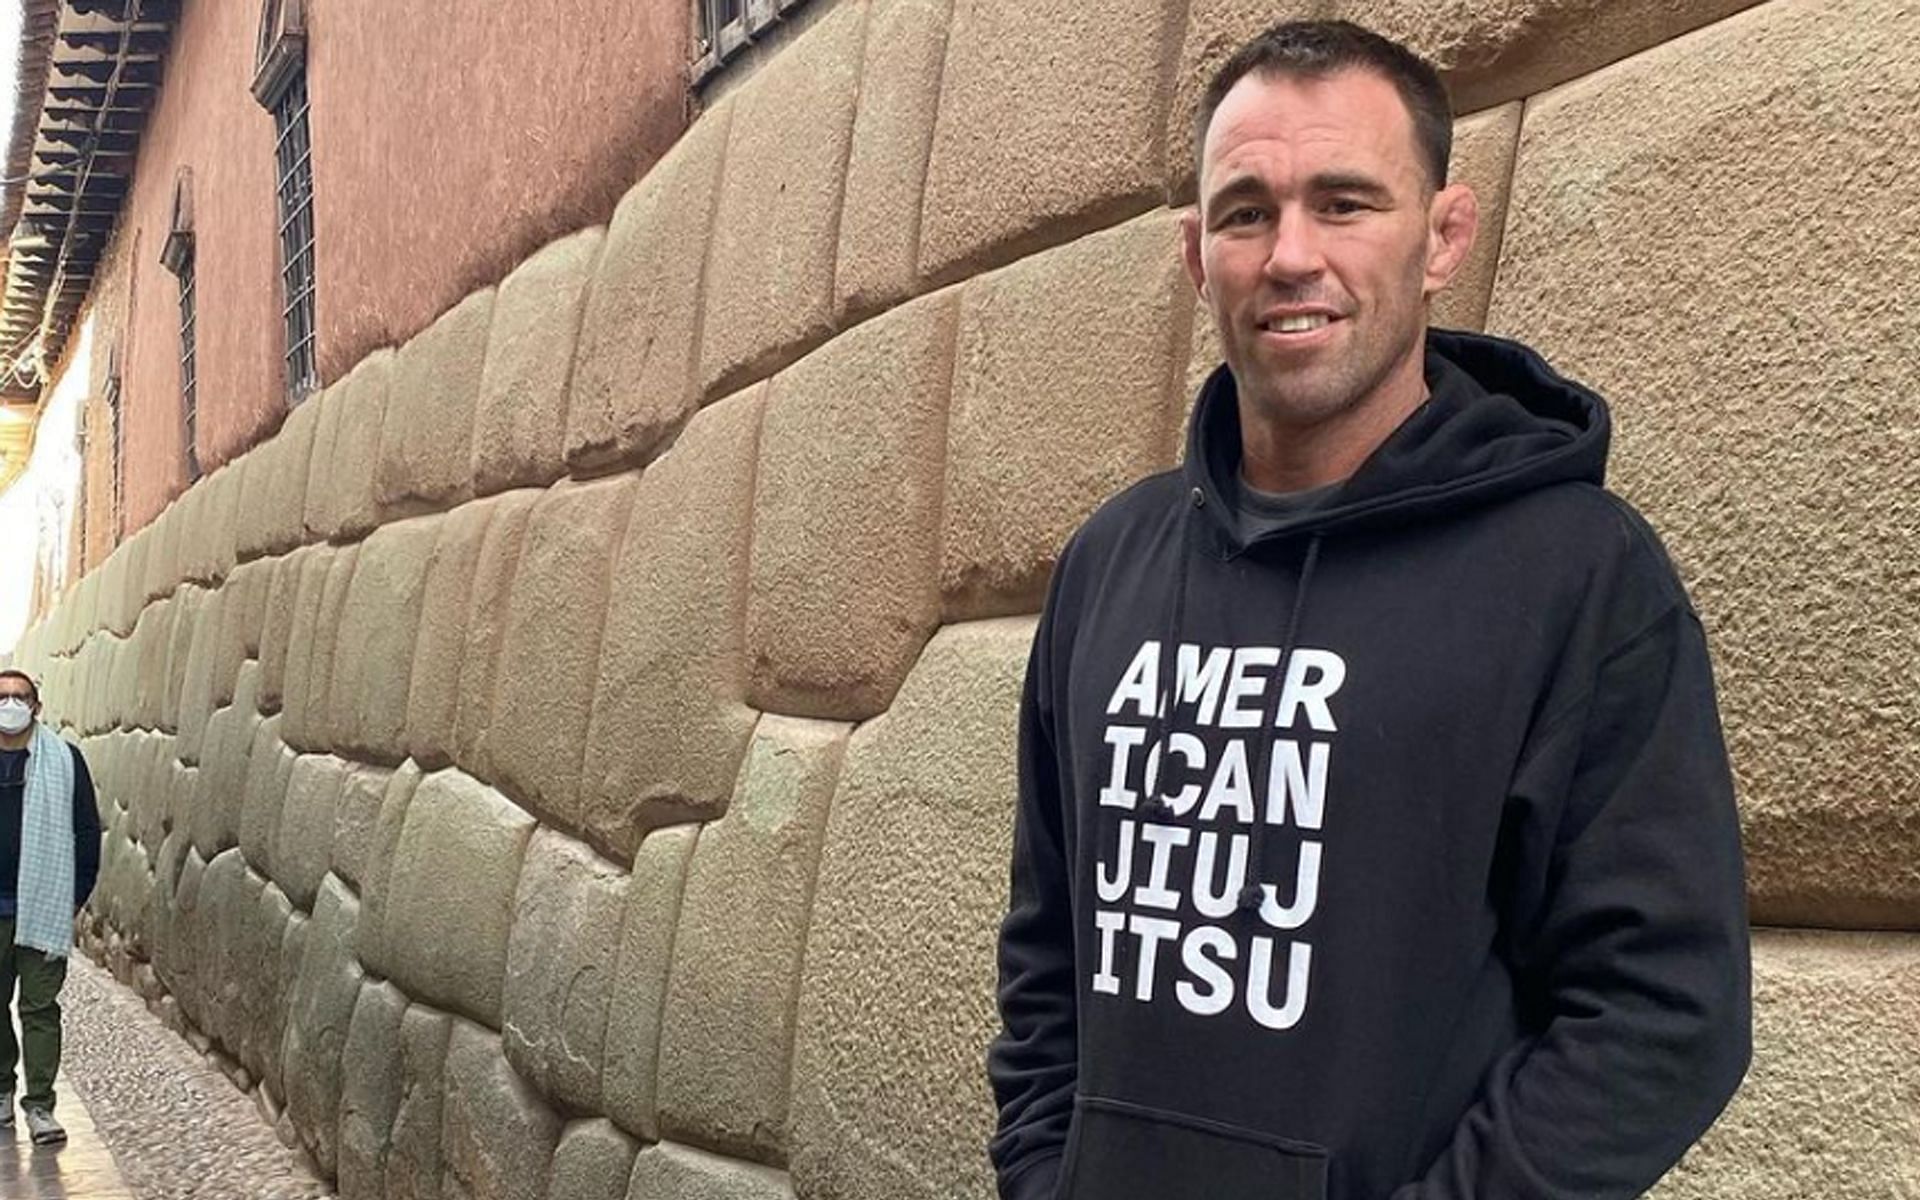 Ex-UFC fighter Jake Shields is a vocal critic of Israel